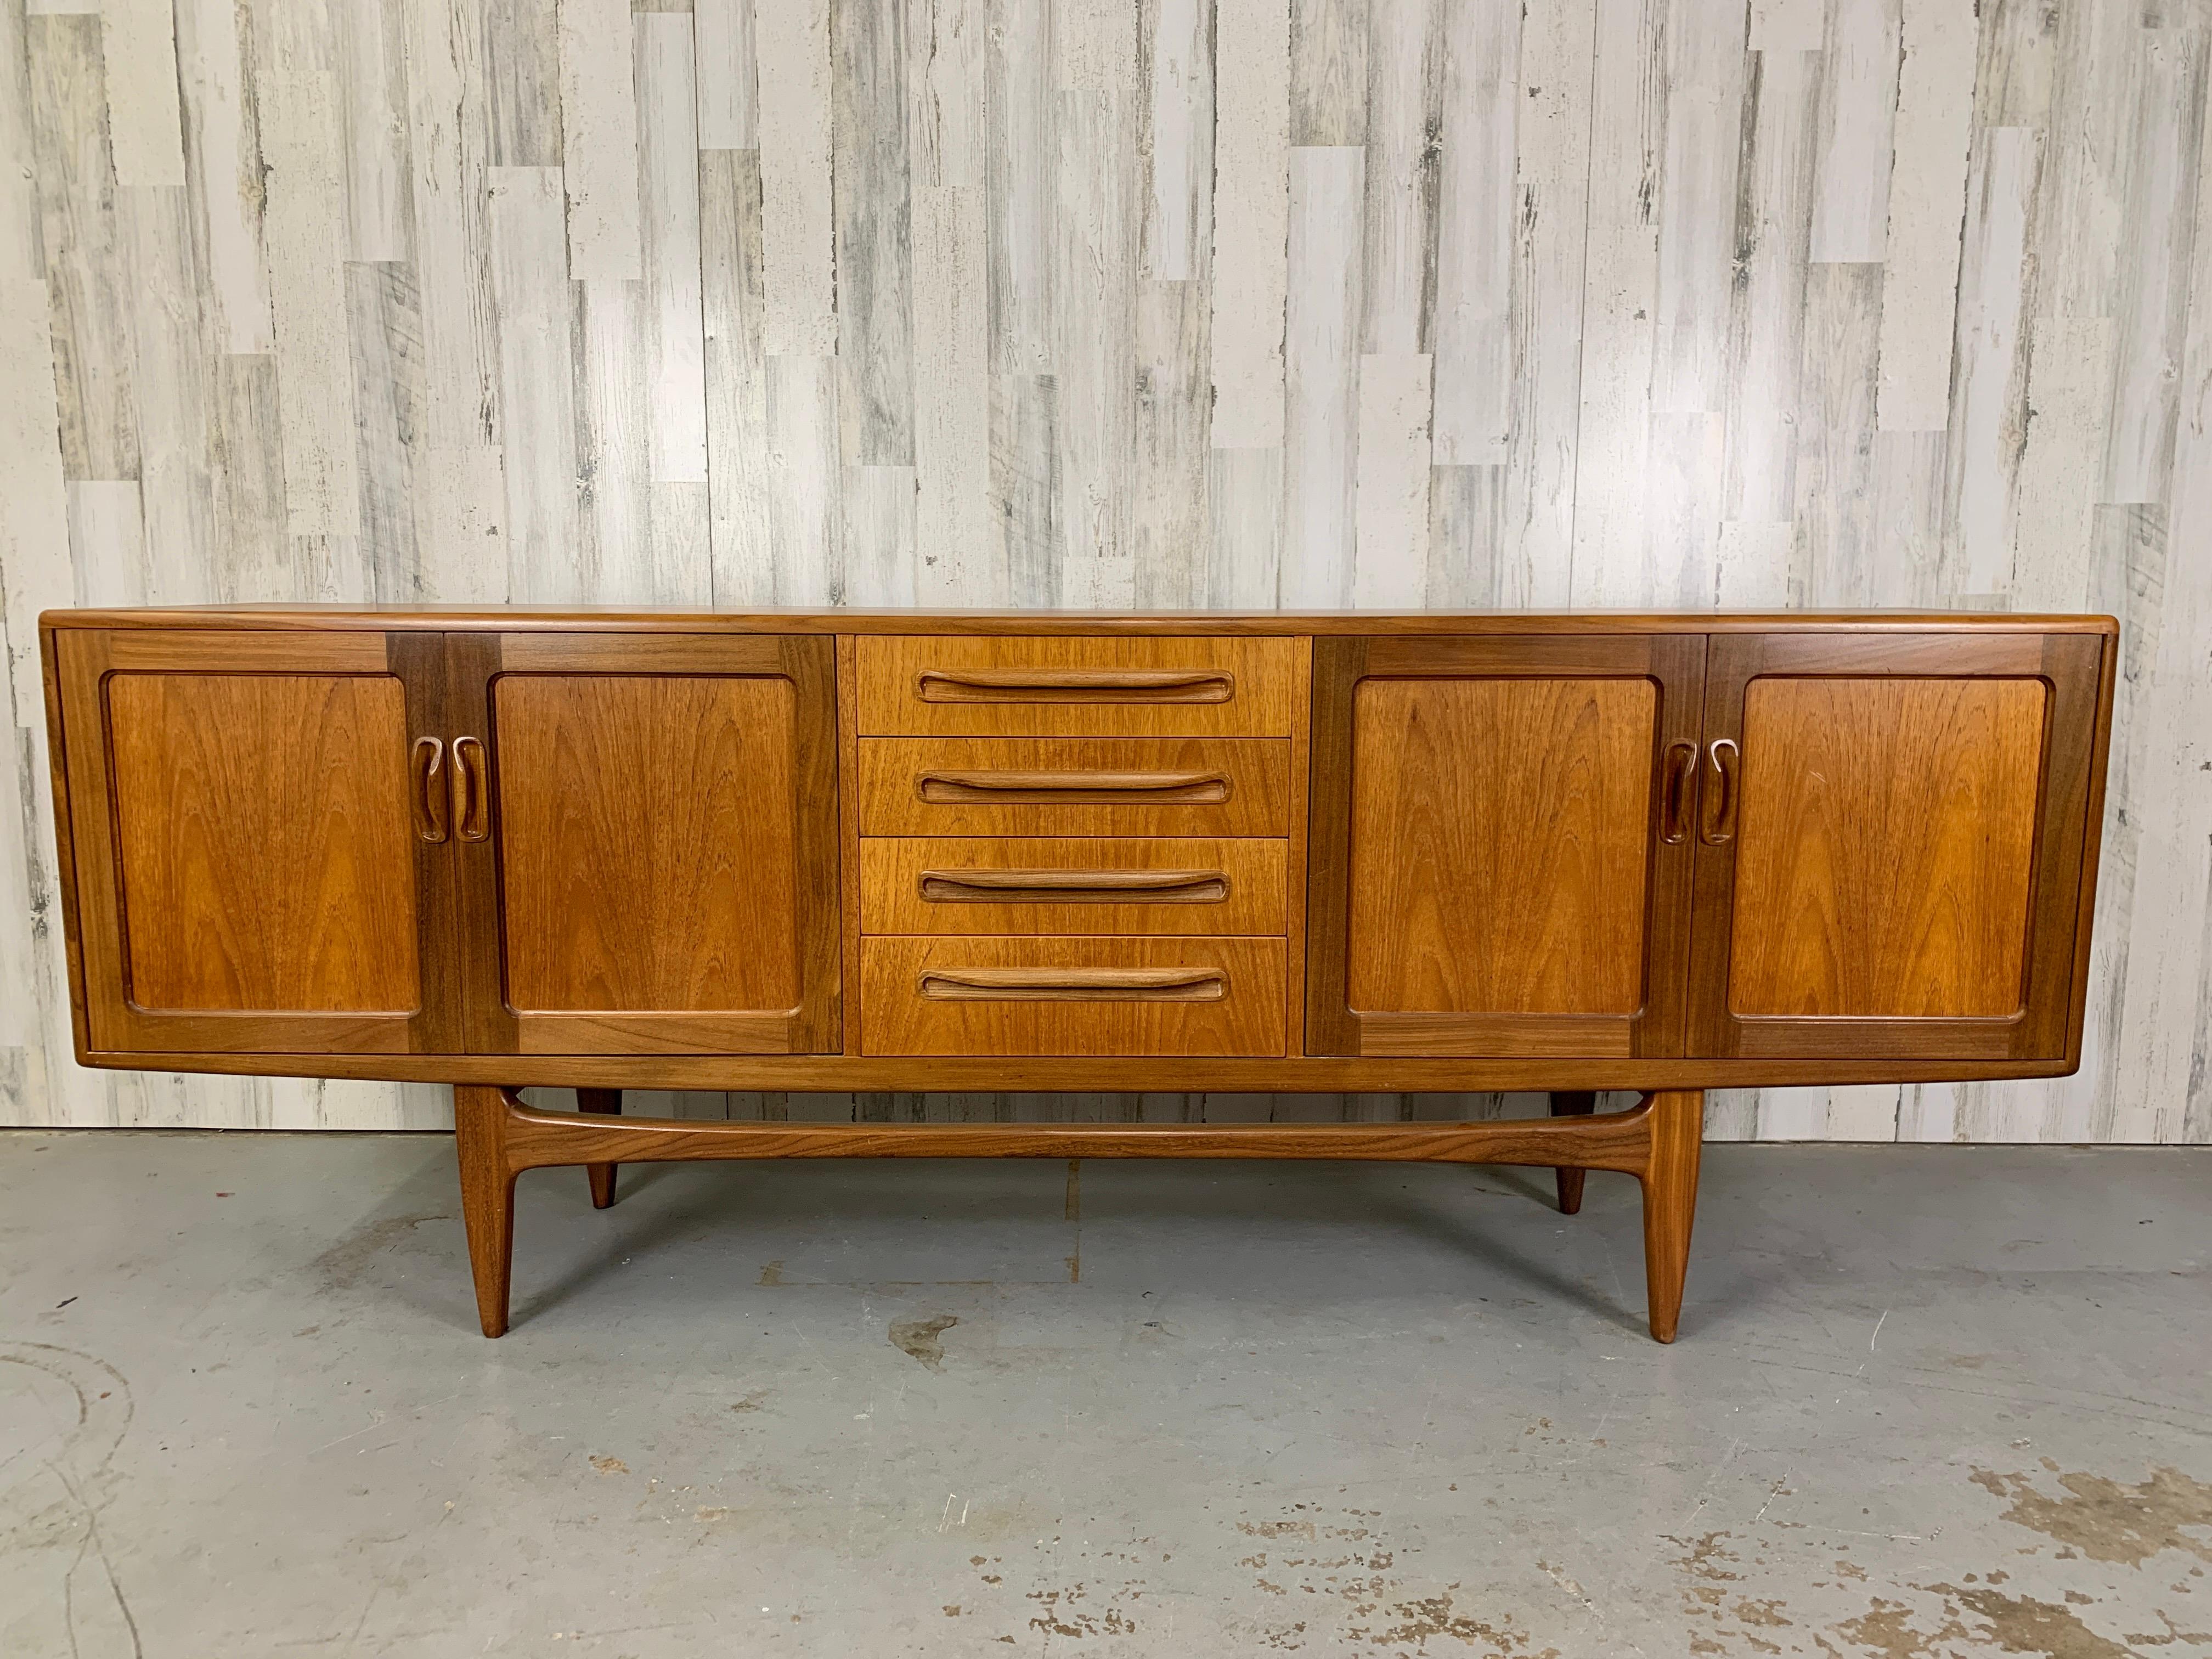 7 foot long teak credenza designed by IB Kofod-Larsen for G plan. In very good original condition with dovetailed drawers and adjustable shelves.